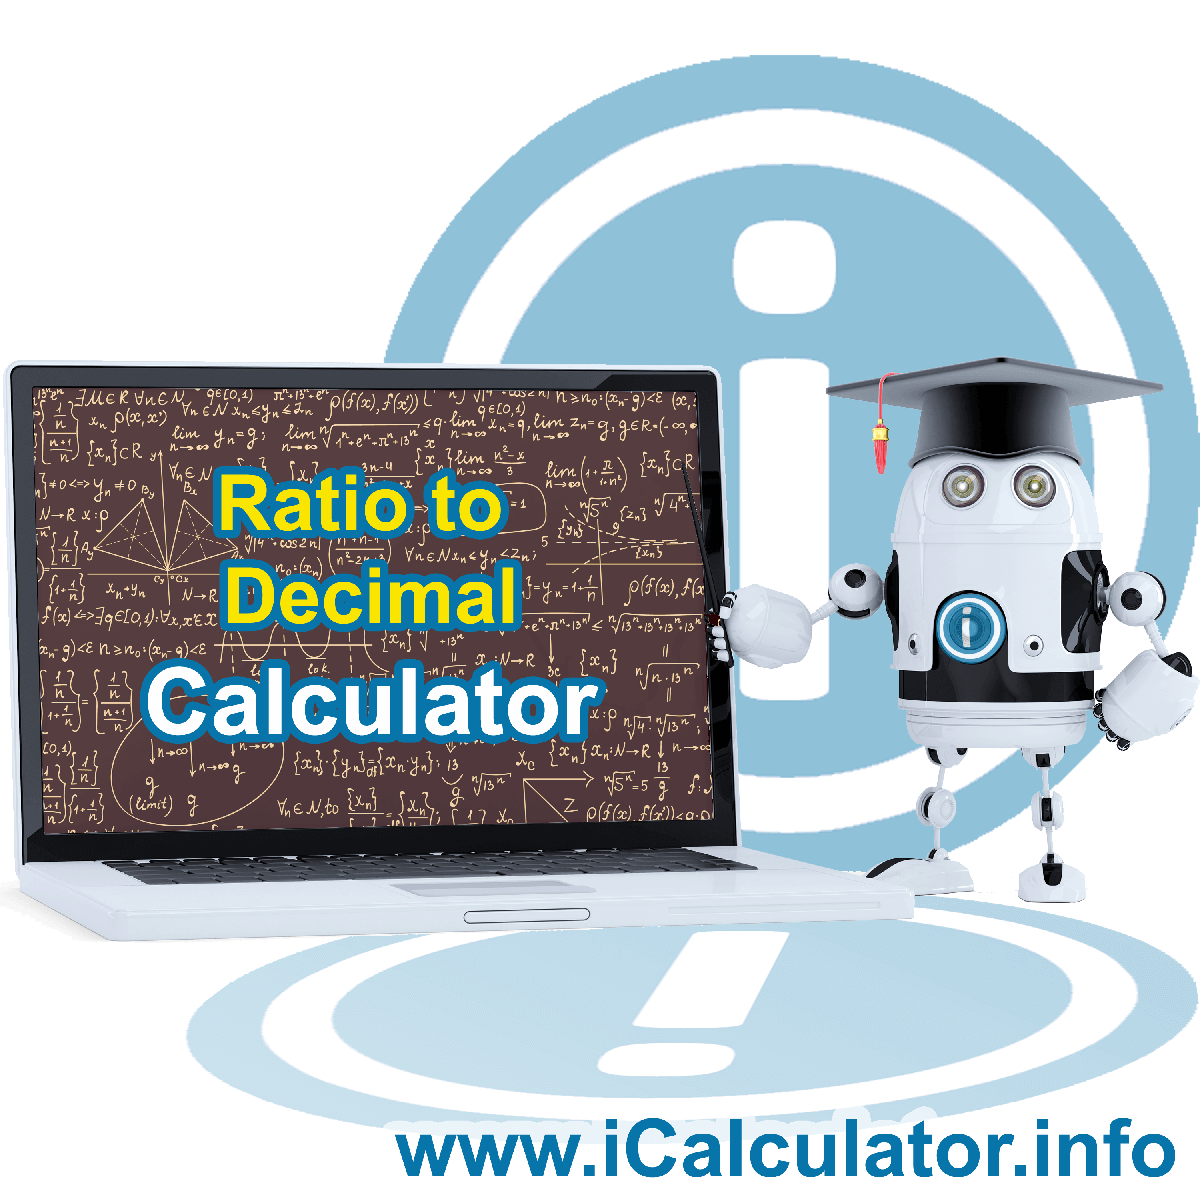 Ratio To Decimal. This image shows the properties and ratio to decimal formula for the Ratio To Decimal